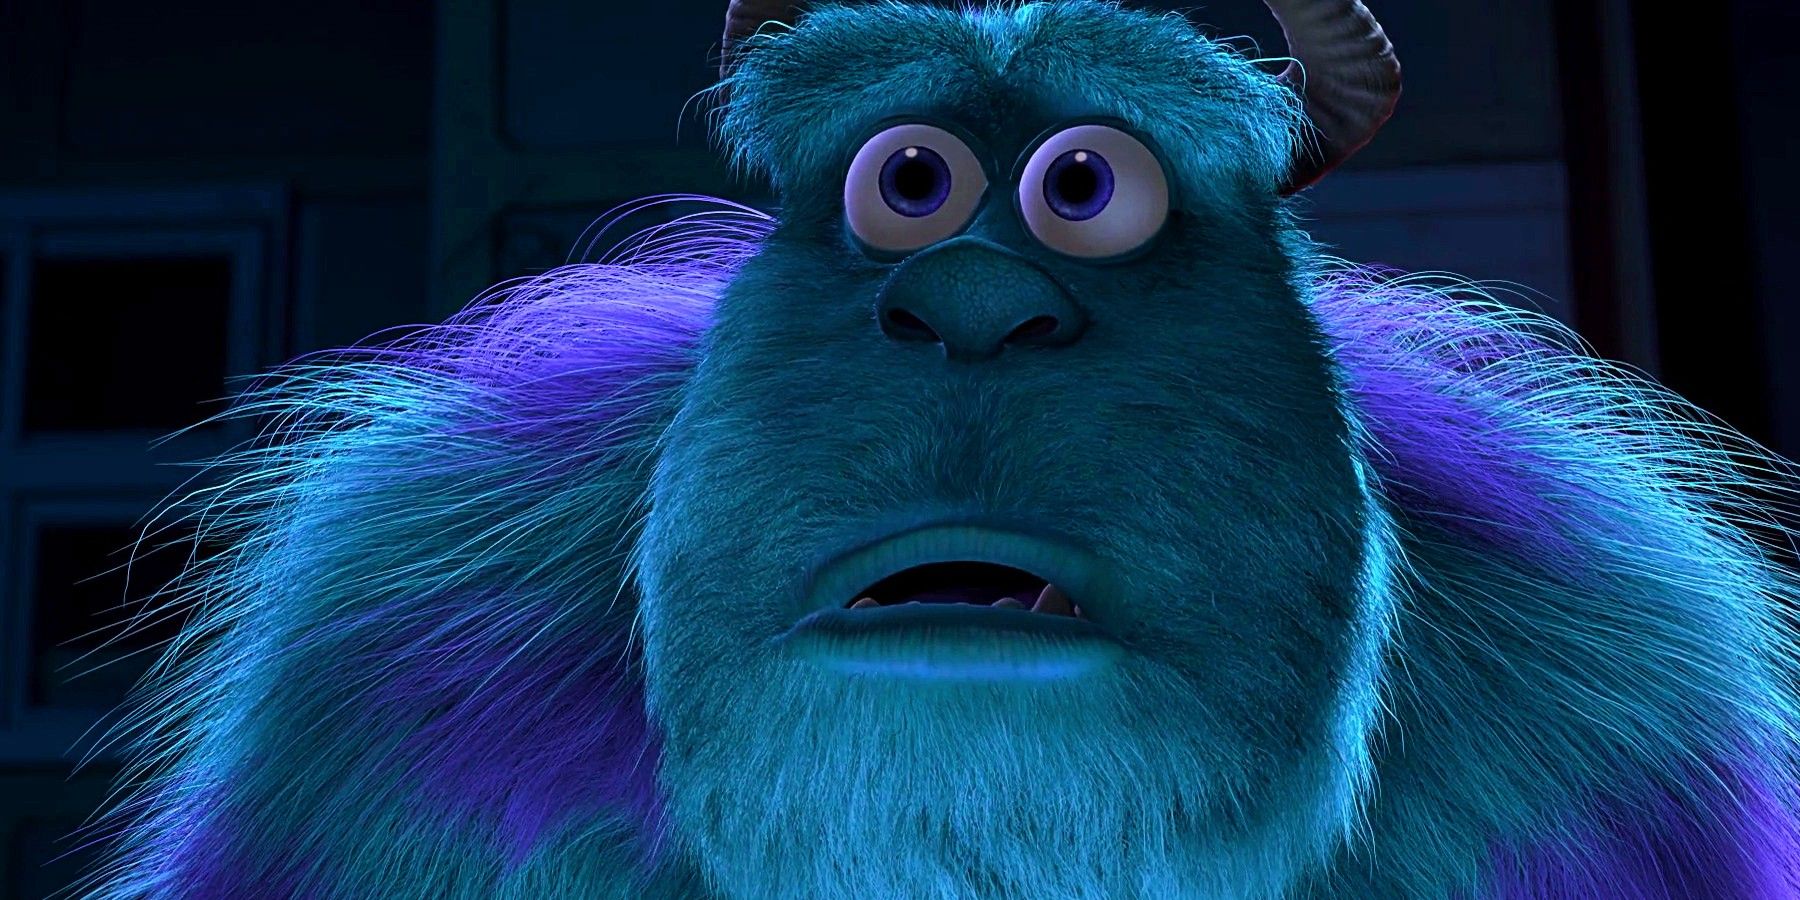 Pixar Theory Reveals Monsters Inc Was A Secret Toy Story Prequel All Along